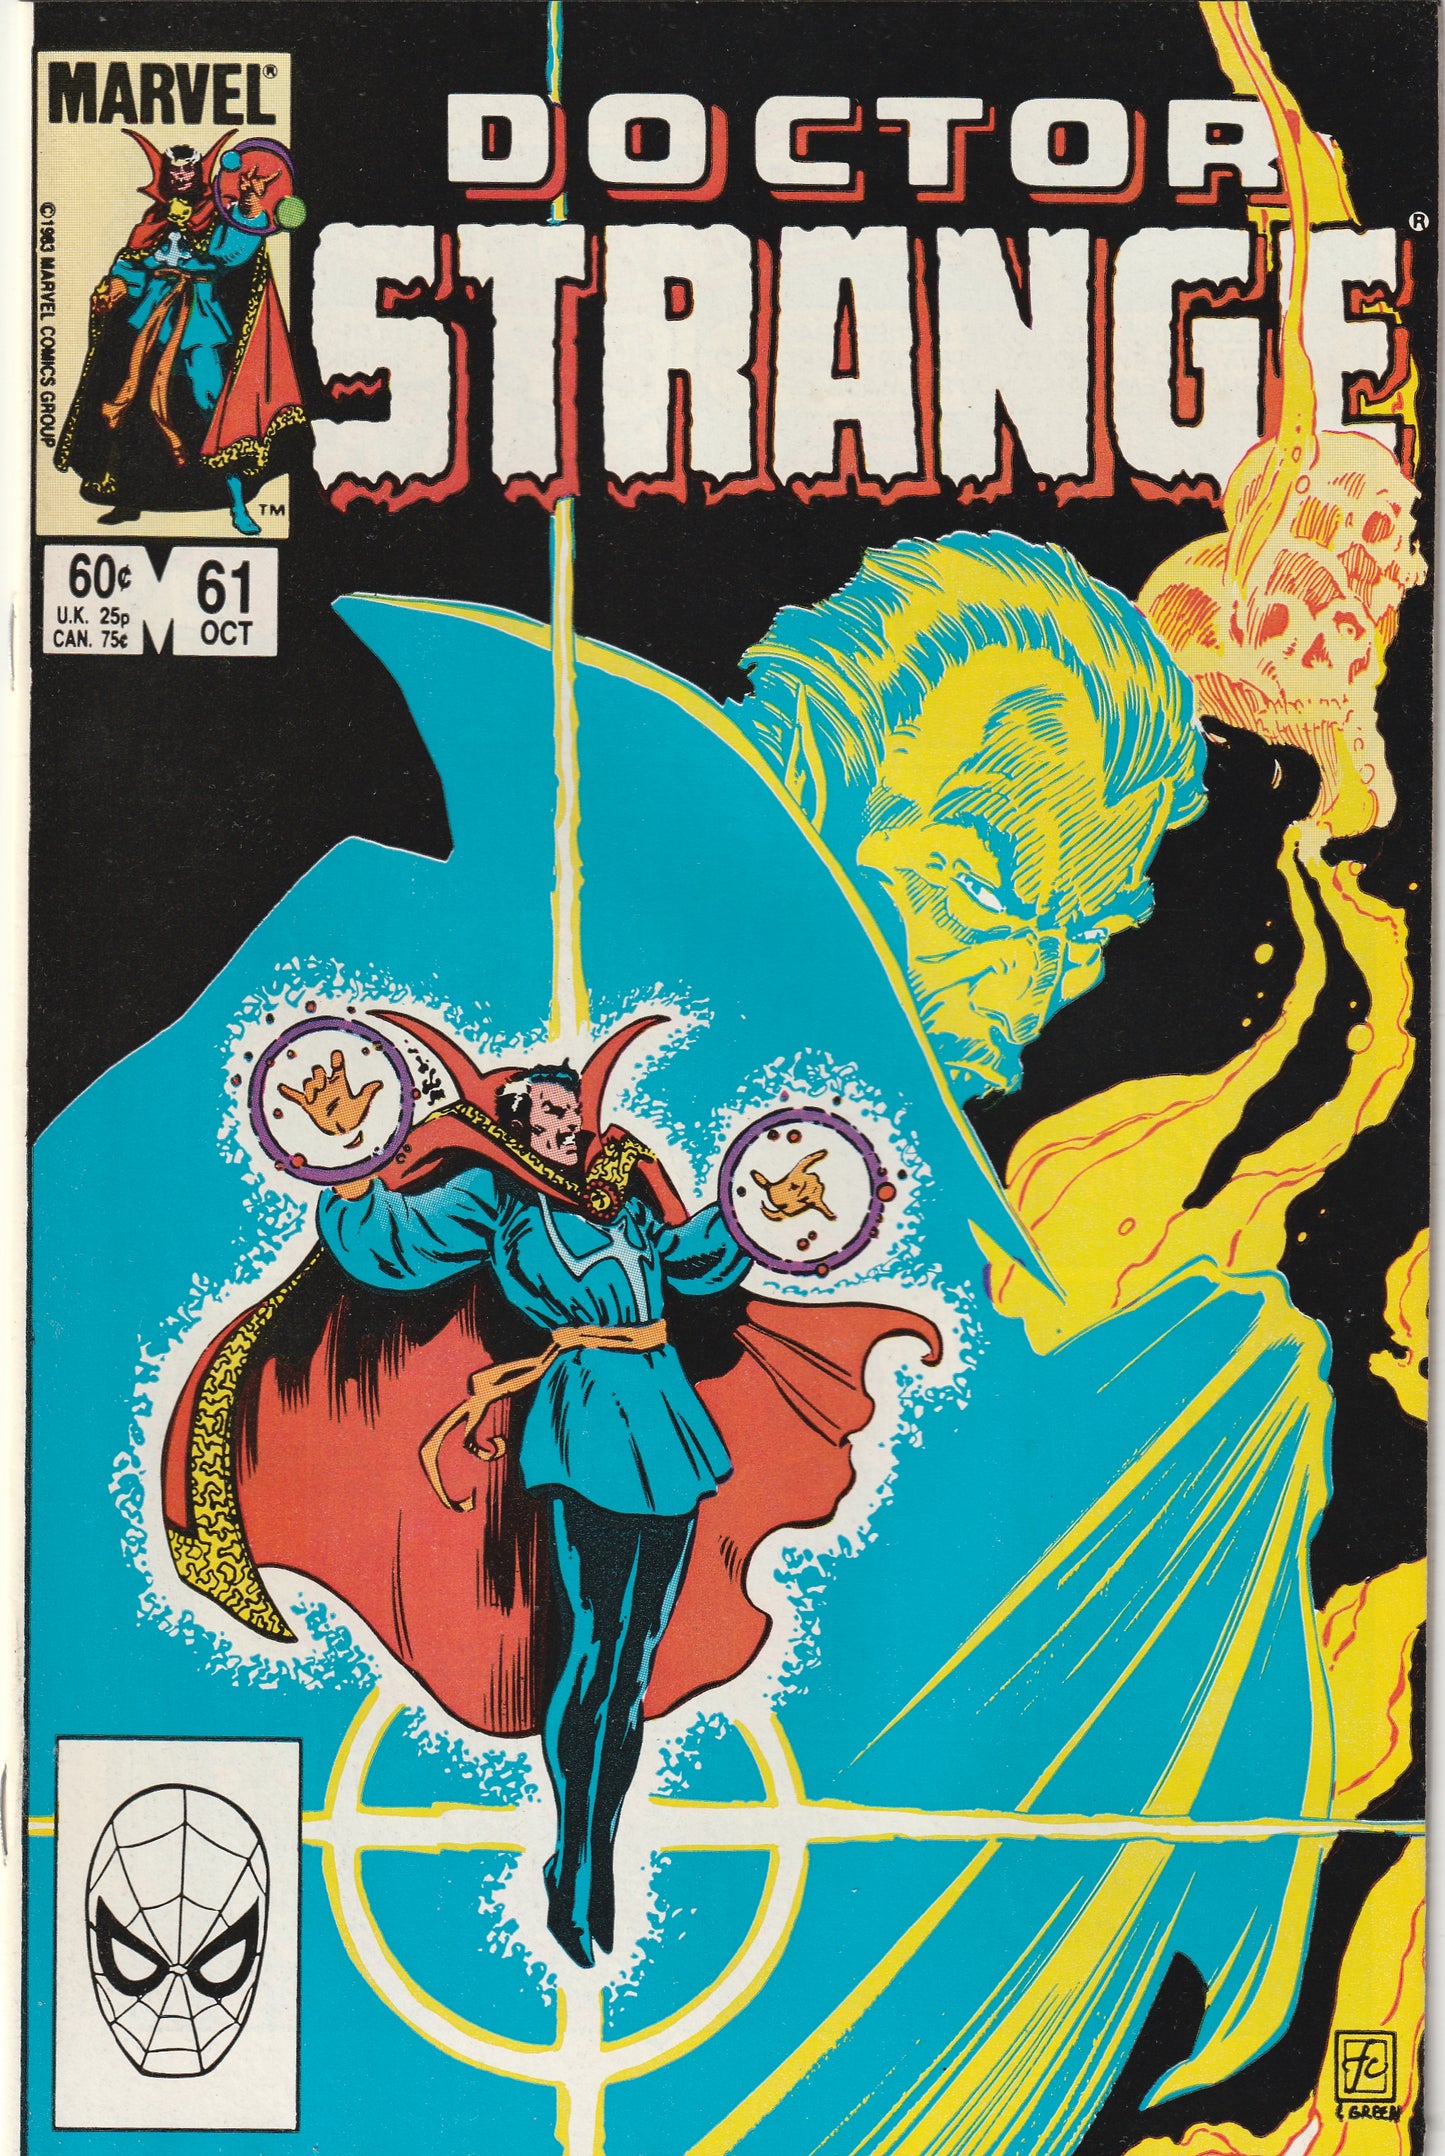 Doctor Strange #61 (1983) - Blade and Doctor Strange Meet for the First Time